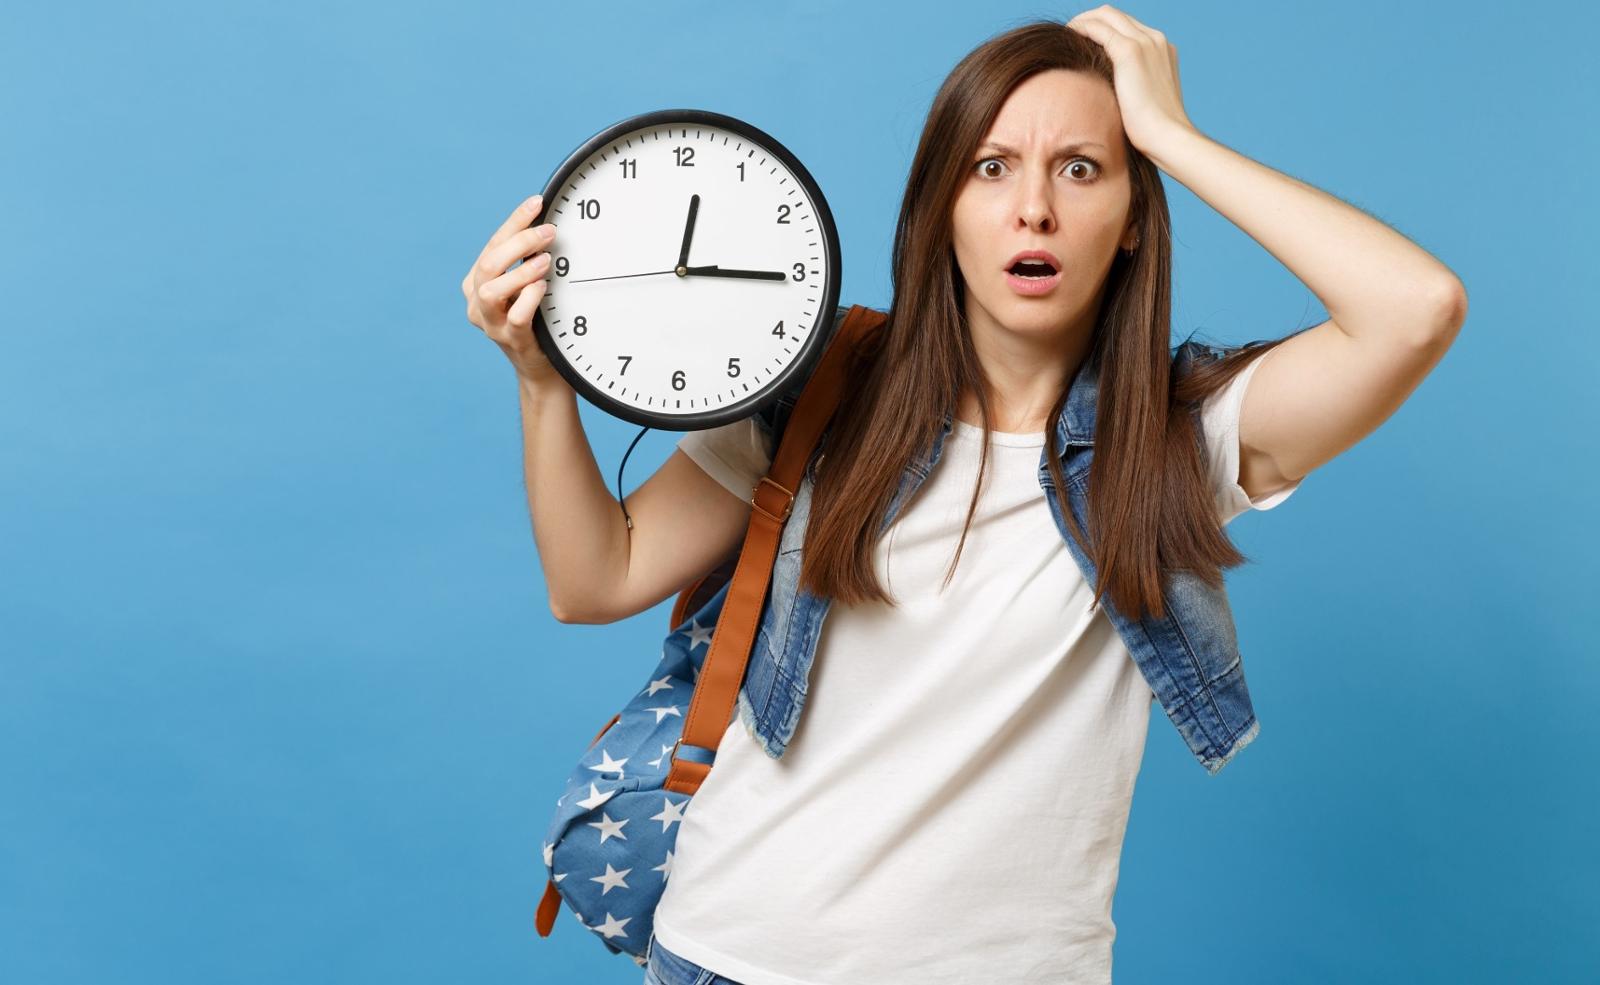 Female student with backpack holds clock and looks stressed as time ticks away.